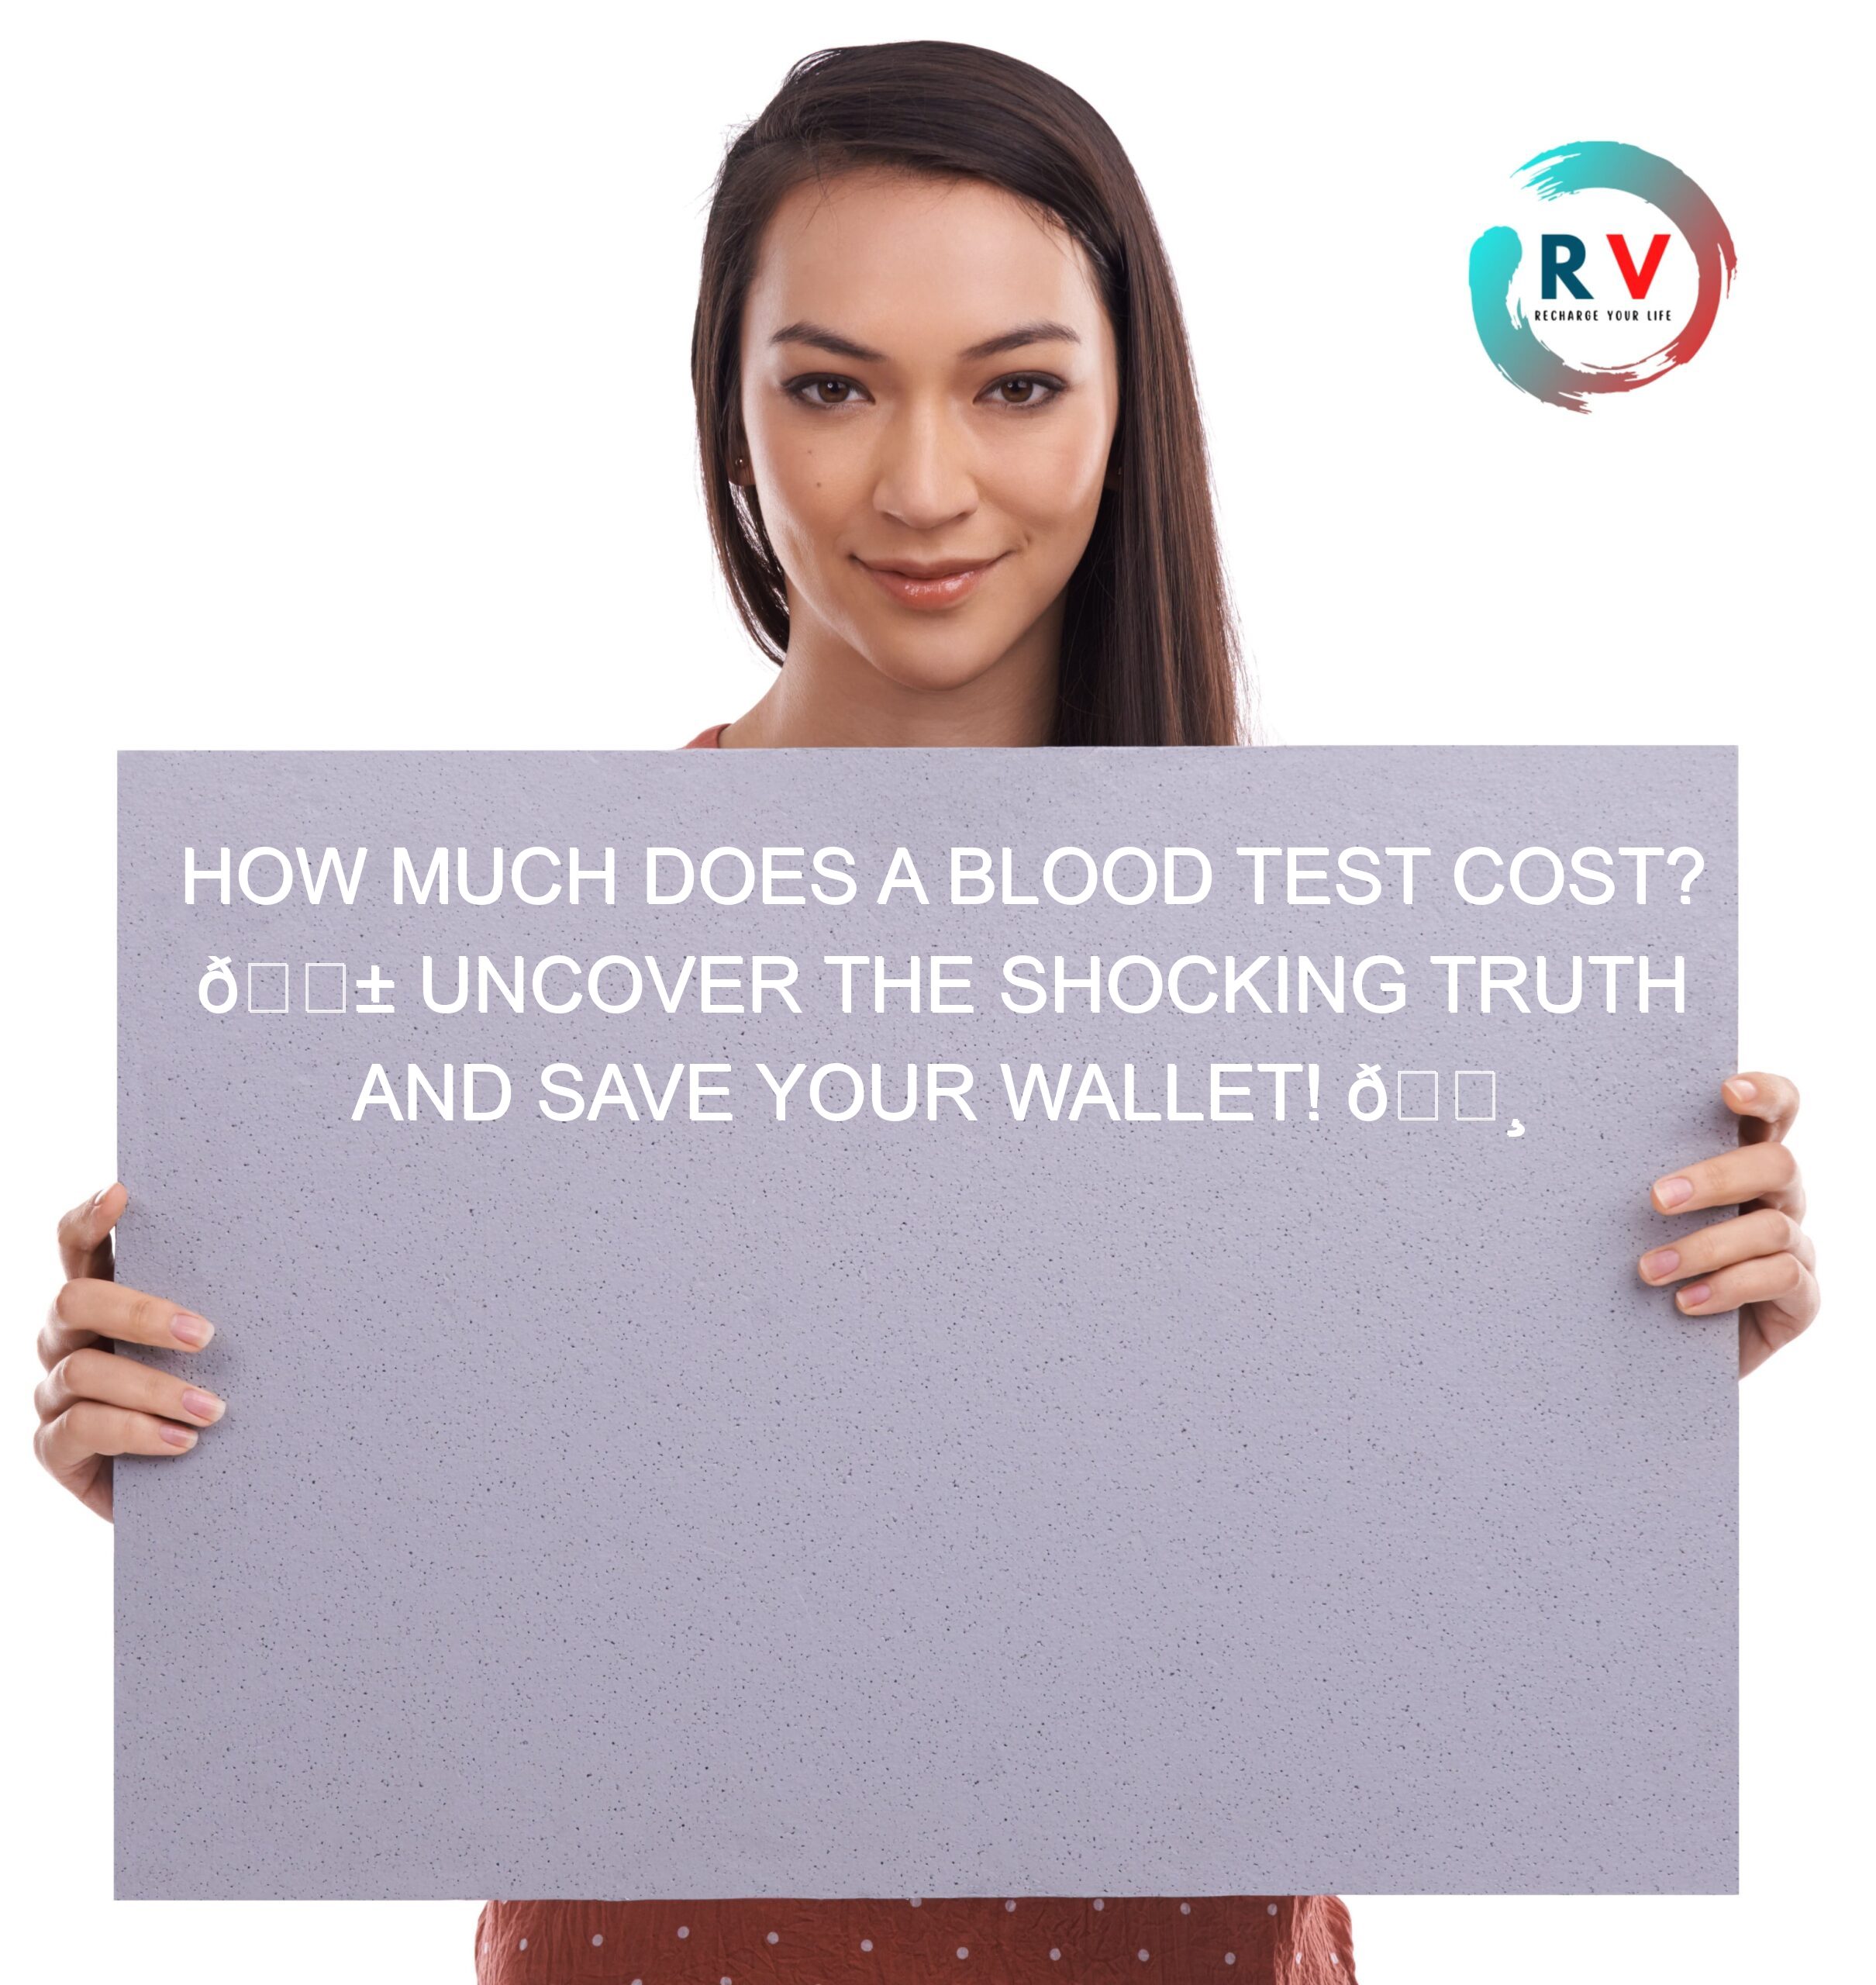 How Much Does a Blood Test Cost? Uncover the Shocking Truth and Save Your Wallet!